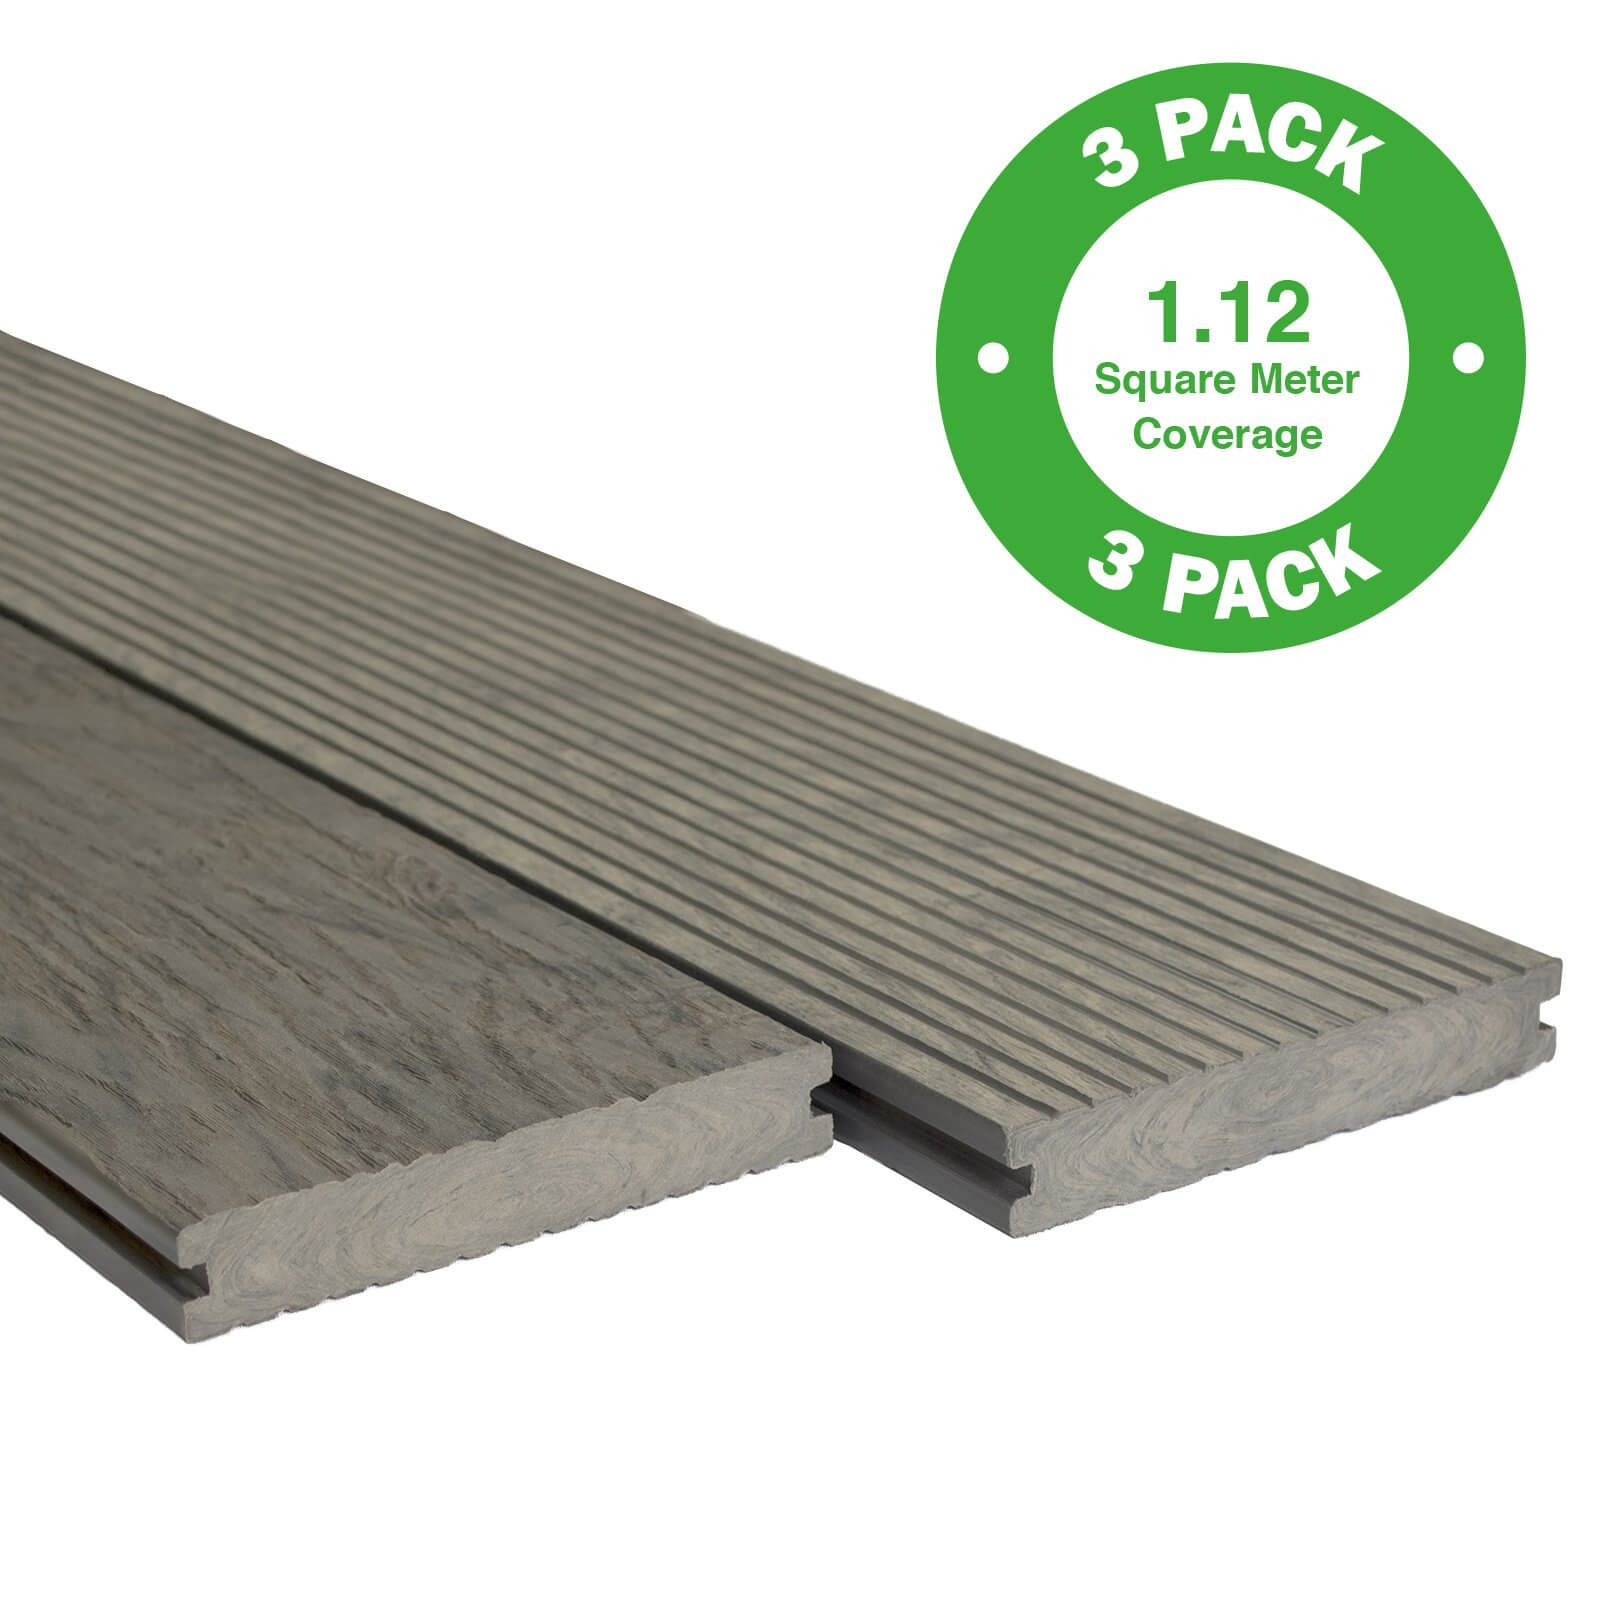 Photo of Heritage Board Composite Decking - 3 Pack - Drift - 1.12 M2